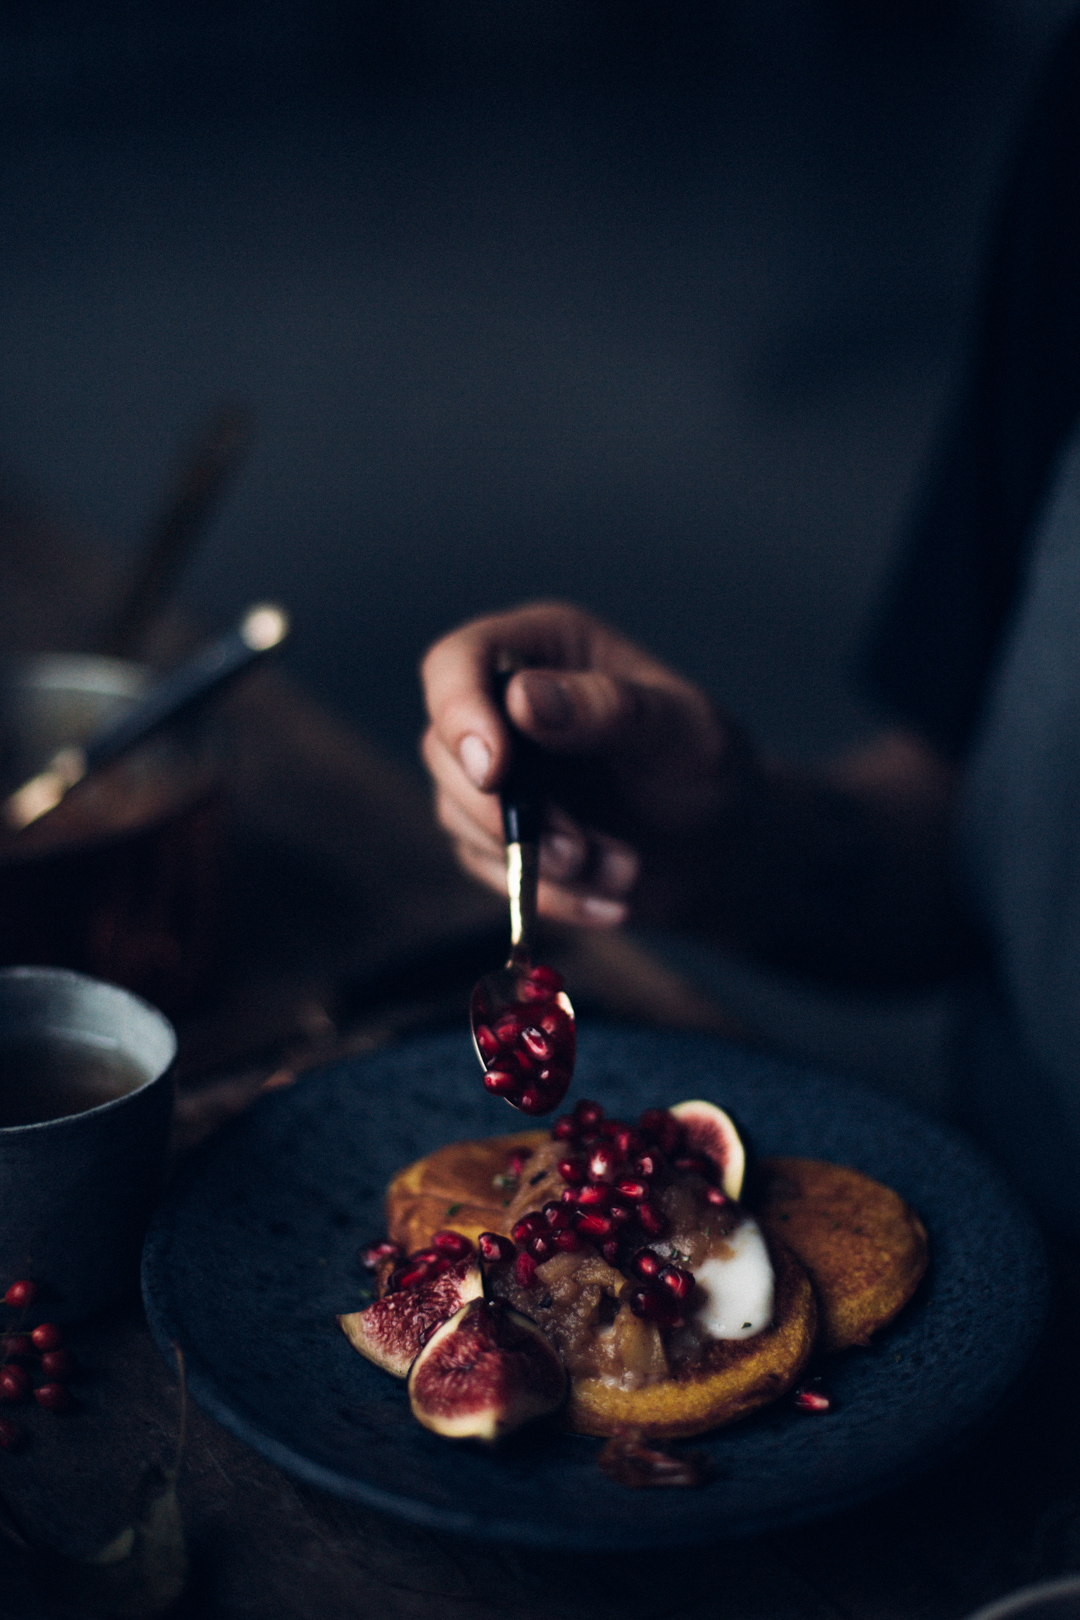 pumpkin-pancakes-with-food-stories-photography-by-christiann-koepke-of-christiannkoepke-com-31